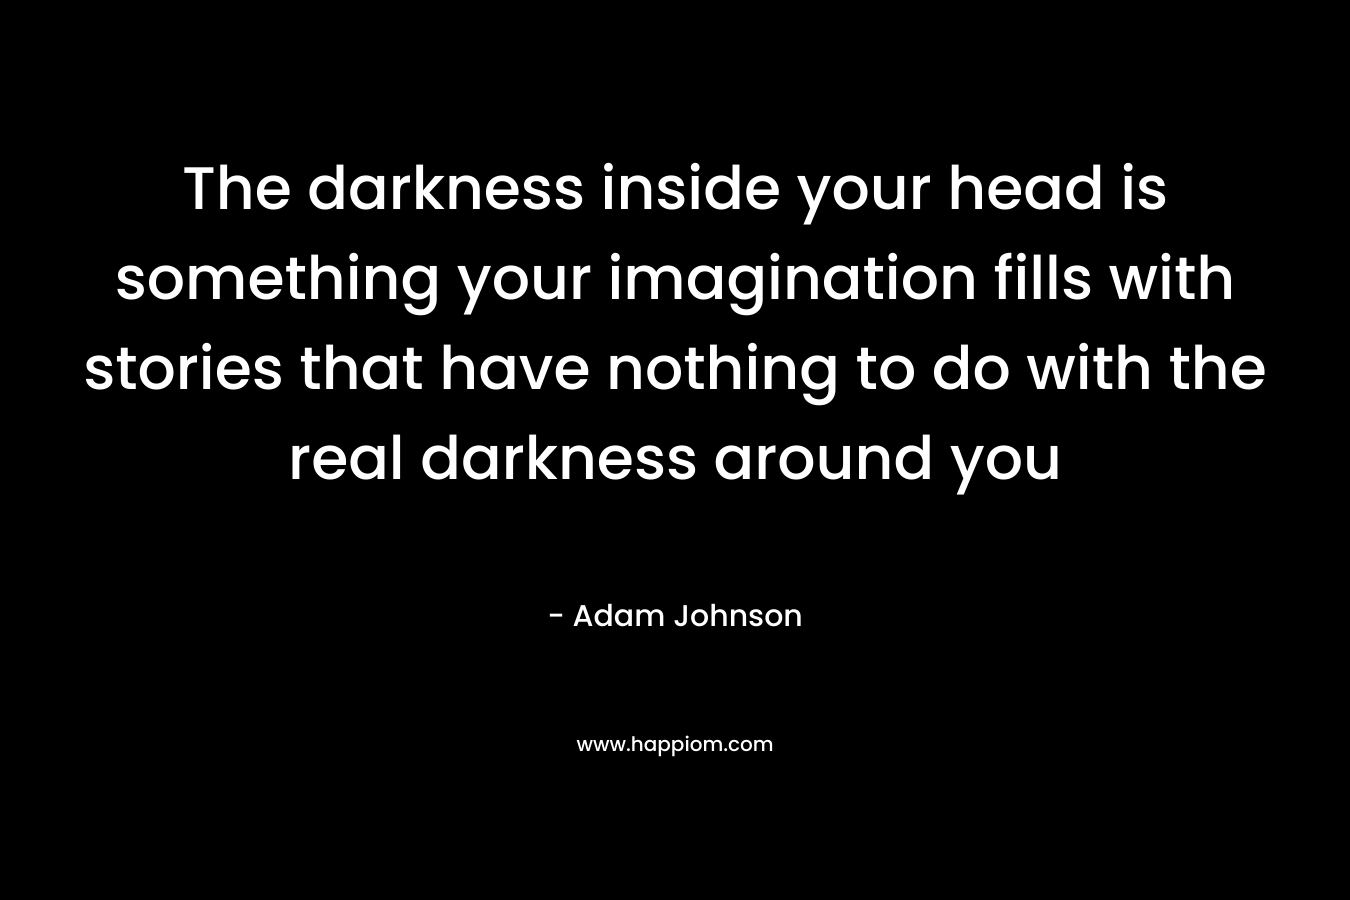 The darkness inside your head is something your imagination fills with stories that have nothing to do with the real darkness around you – Adam Johnson